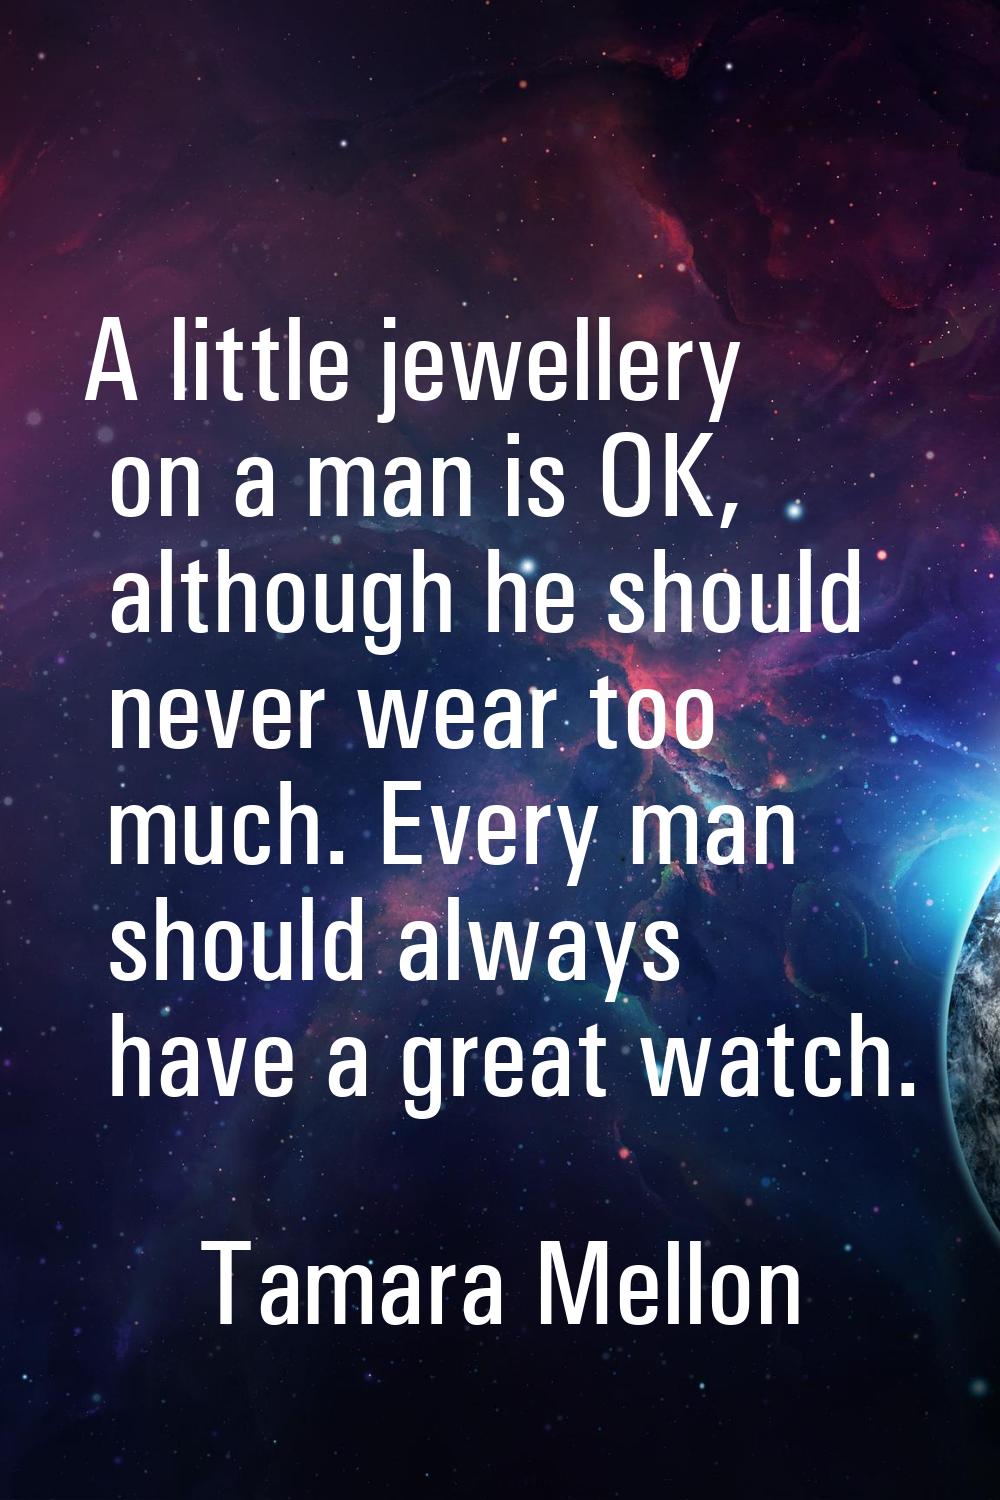 A little jewellery on a man is OK, although he should never wear too much. Every man should always 